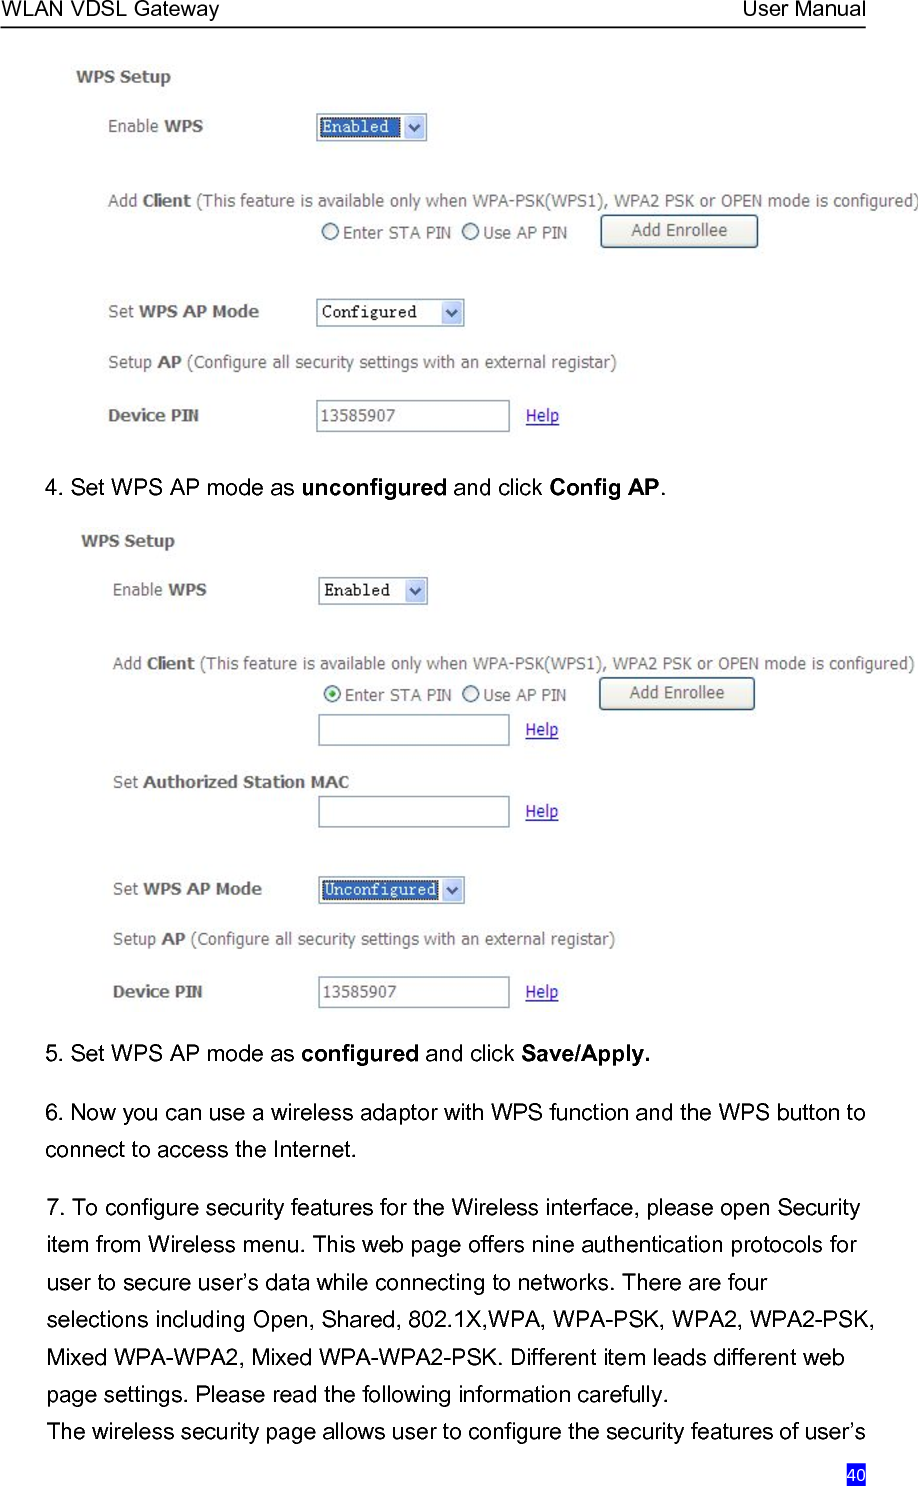 WLAN VDSL Gateway User Manual404. Set WPS AP mode as unconfigured and click Config AP.5. Set WPS AP mode as configured and click Save/Apply.6. Now you can use a wireless adaptor with WPS function and the WPS button toconnect to access the Internet.7. To configure security features for the Wireless interface, please open Securityitem from Wireless menu. This web page offers nine authentication protocols foruser to secure user’s data while connecting to networks. There are fourselections including Open, Shared, 802.1X,WPA, WPA-PSK, WPA2, WPA2-PSK,Mixed WPA-WPA2, Mixed WPA-WPA2-PSK. Different item leads different webpage settings. Please read the following information carefully.The wireless security page allows user to configure the security features of user’s